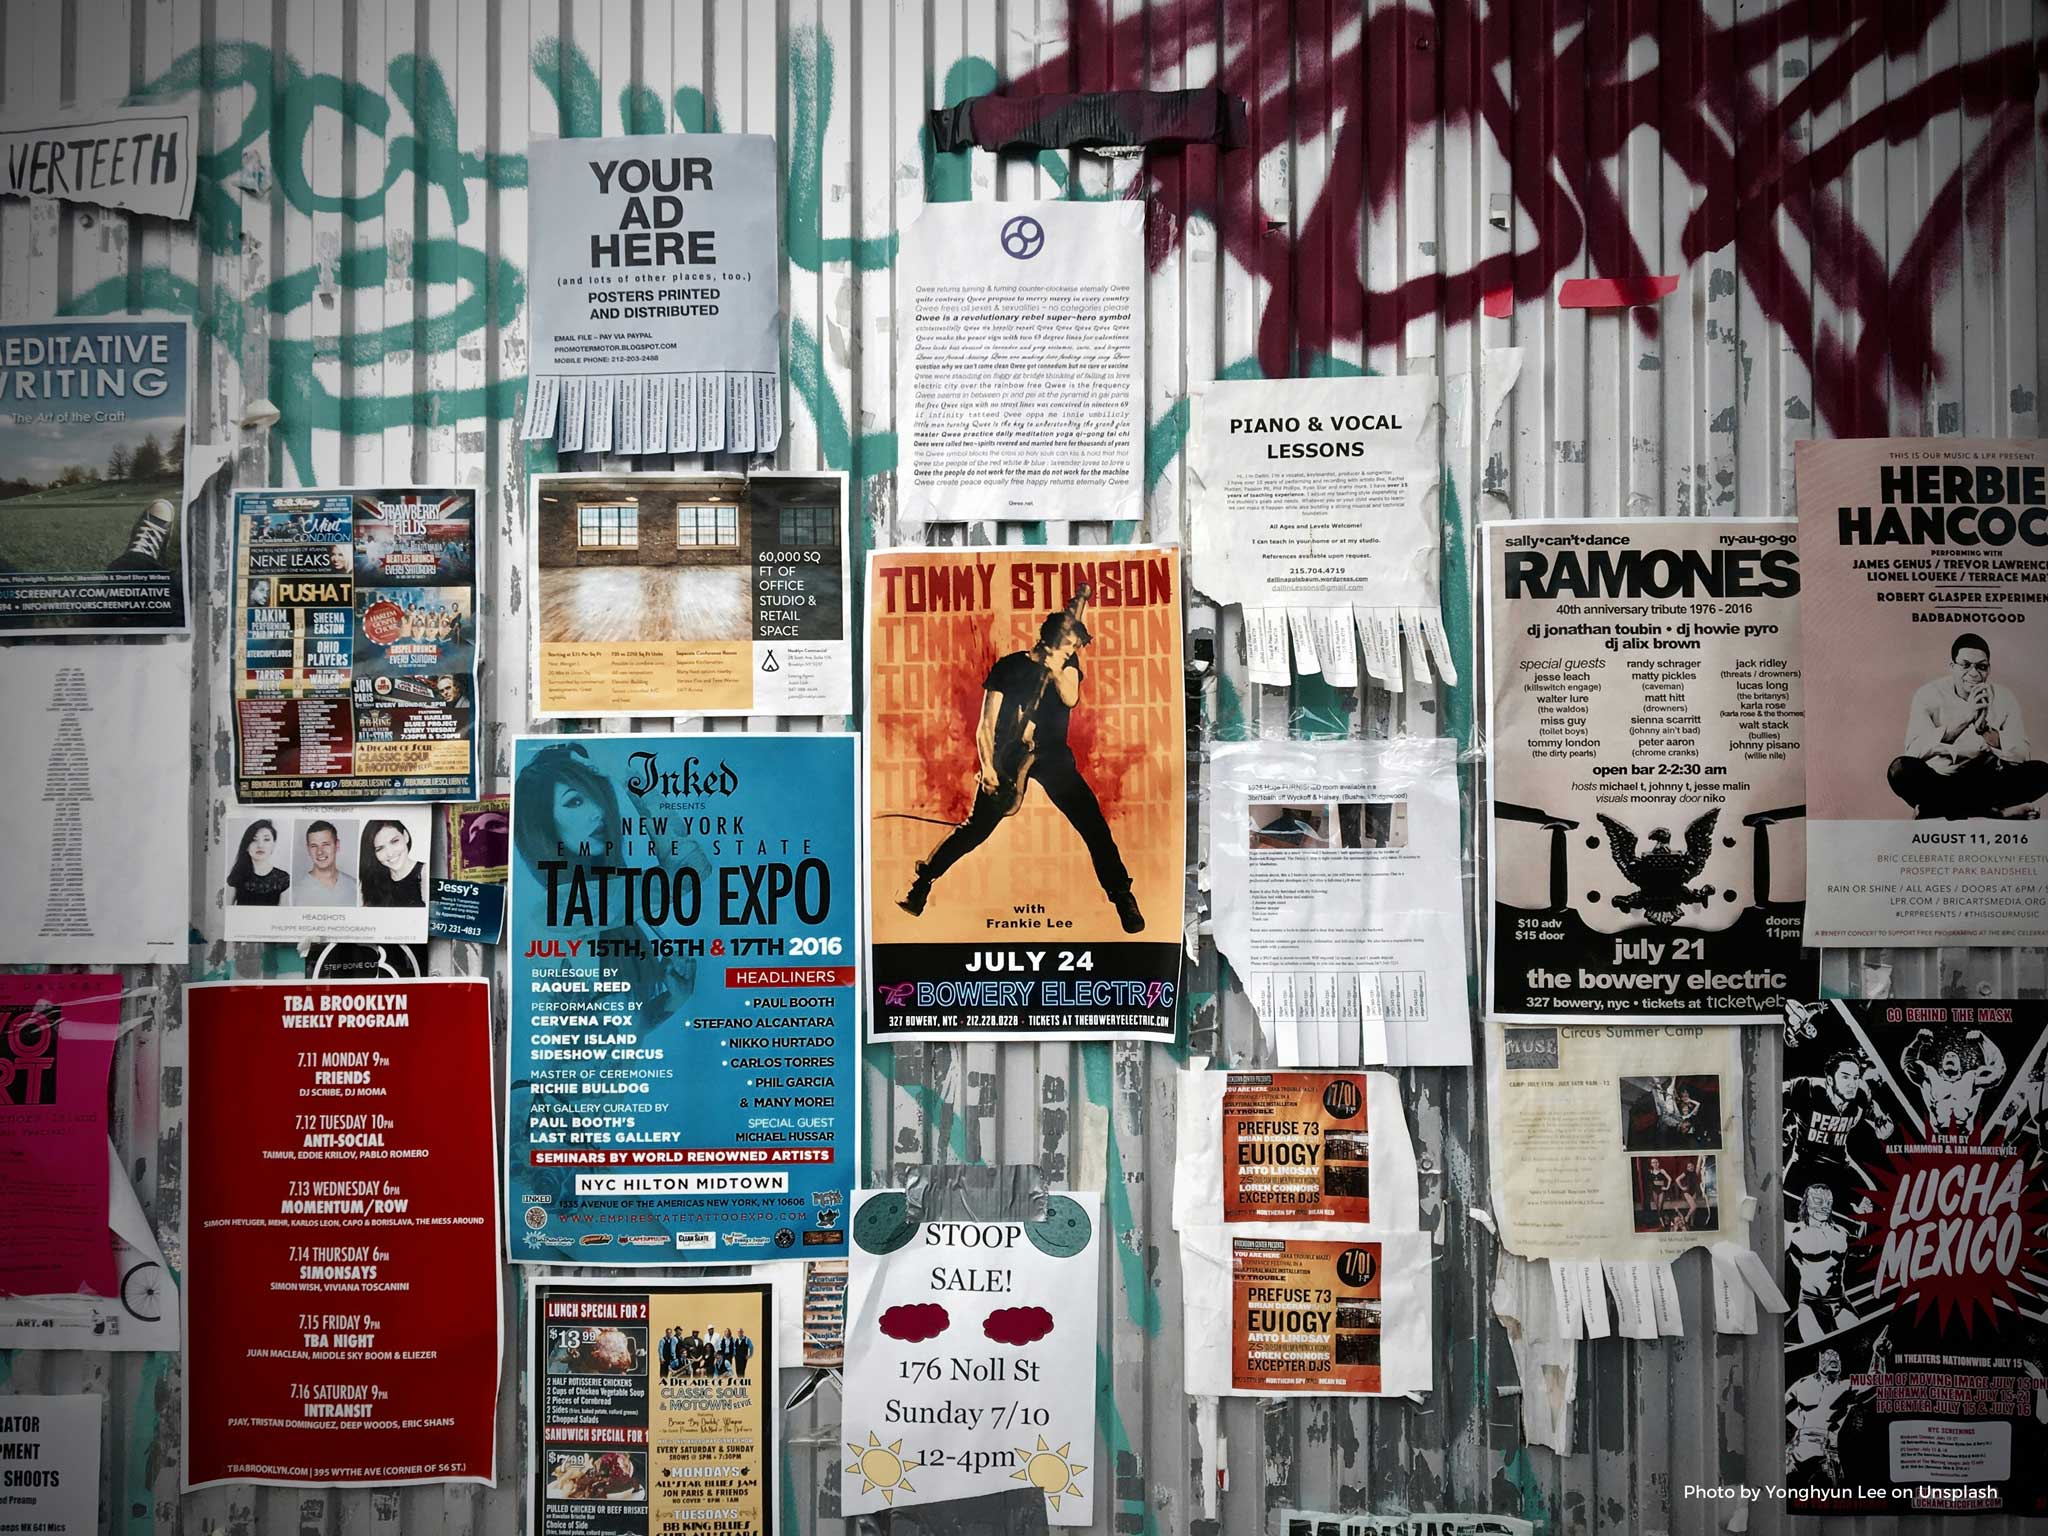 Corrugated metal wall covered in a variety of posters